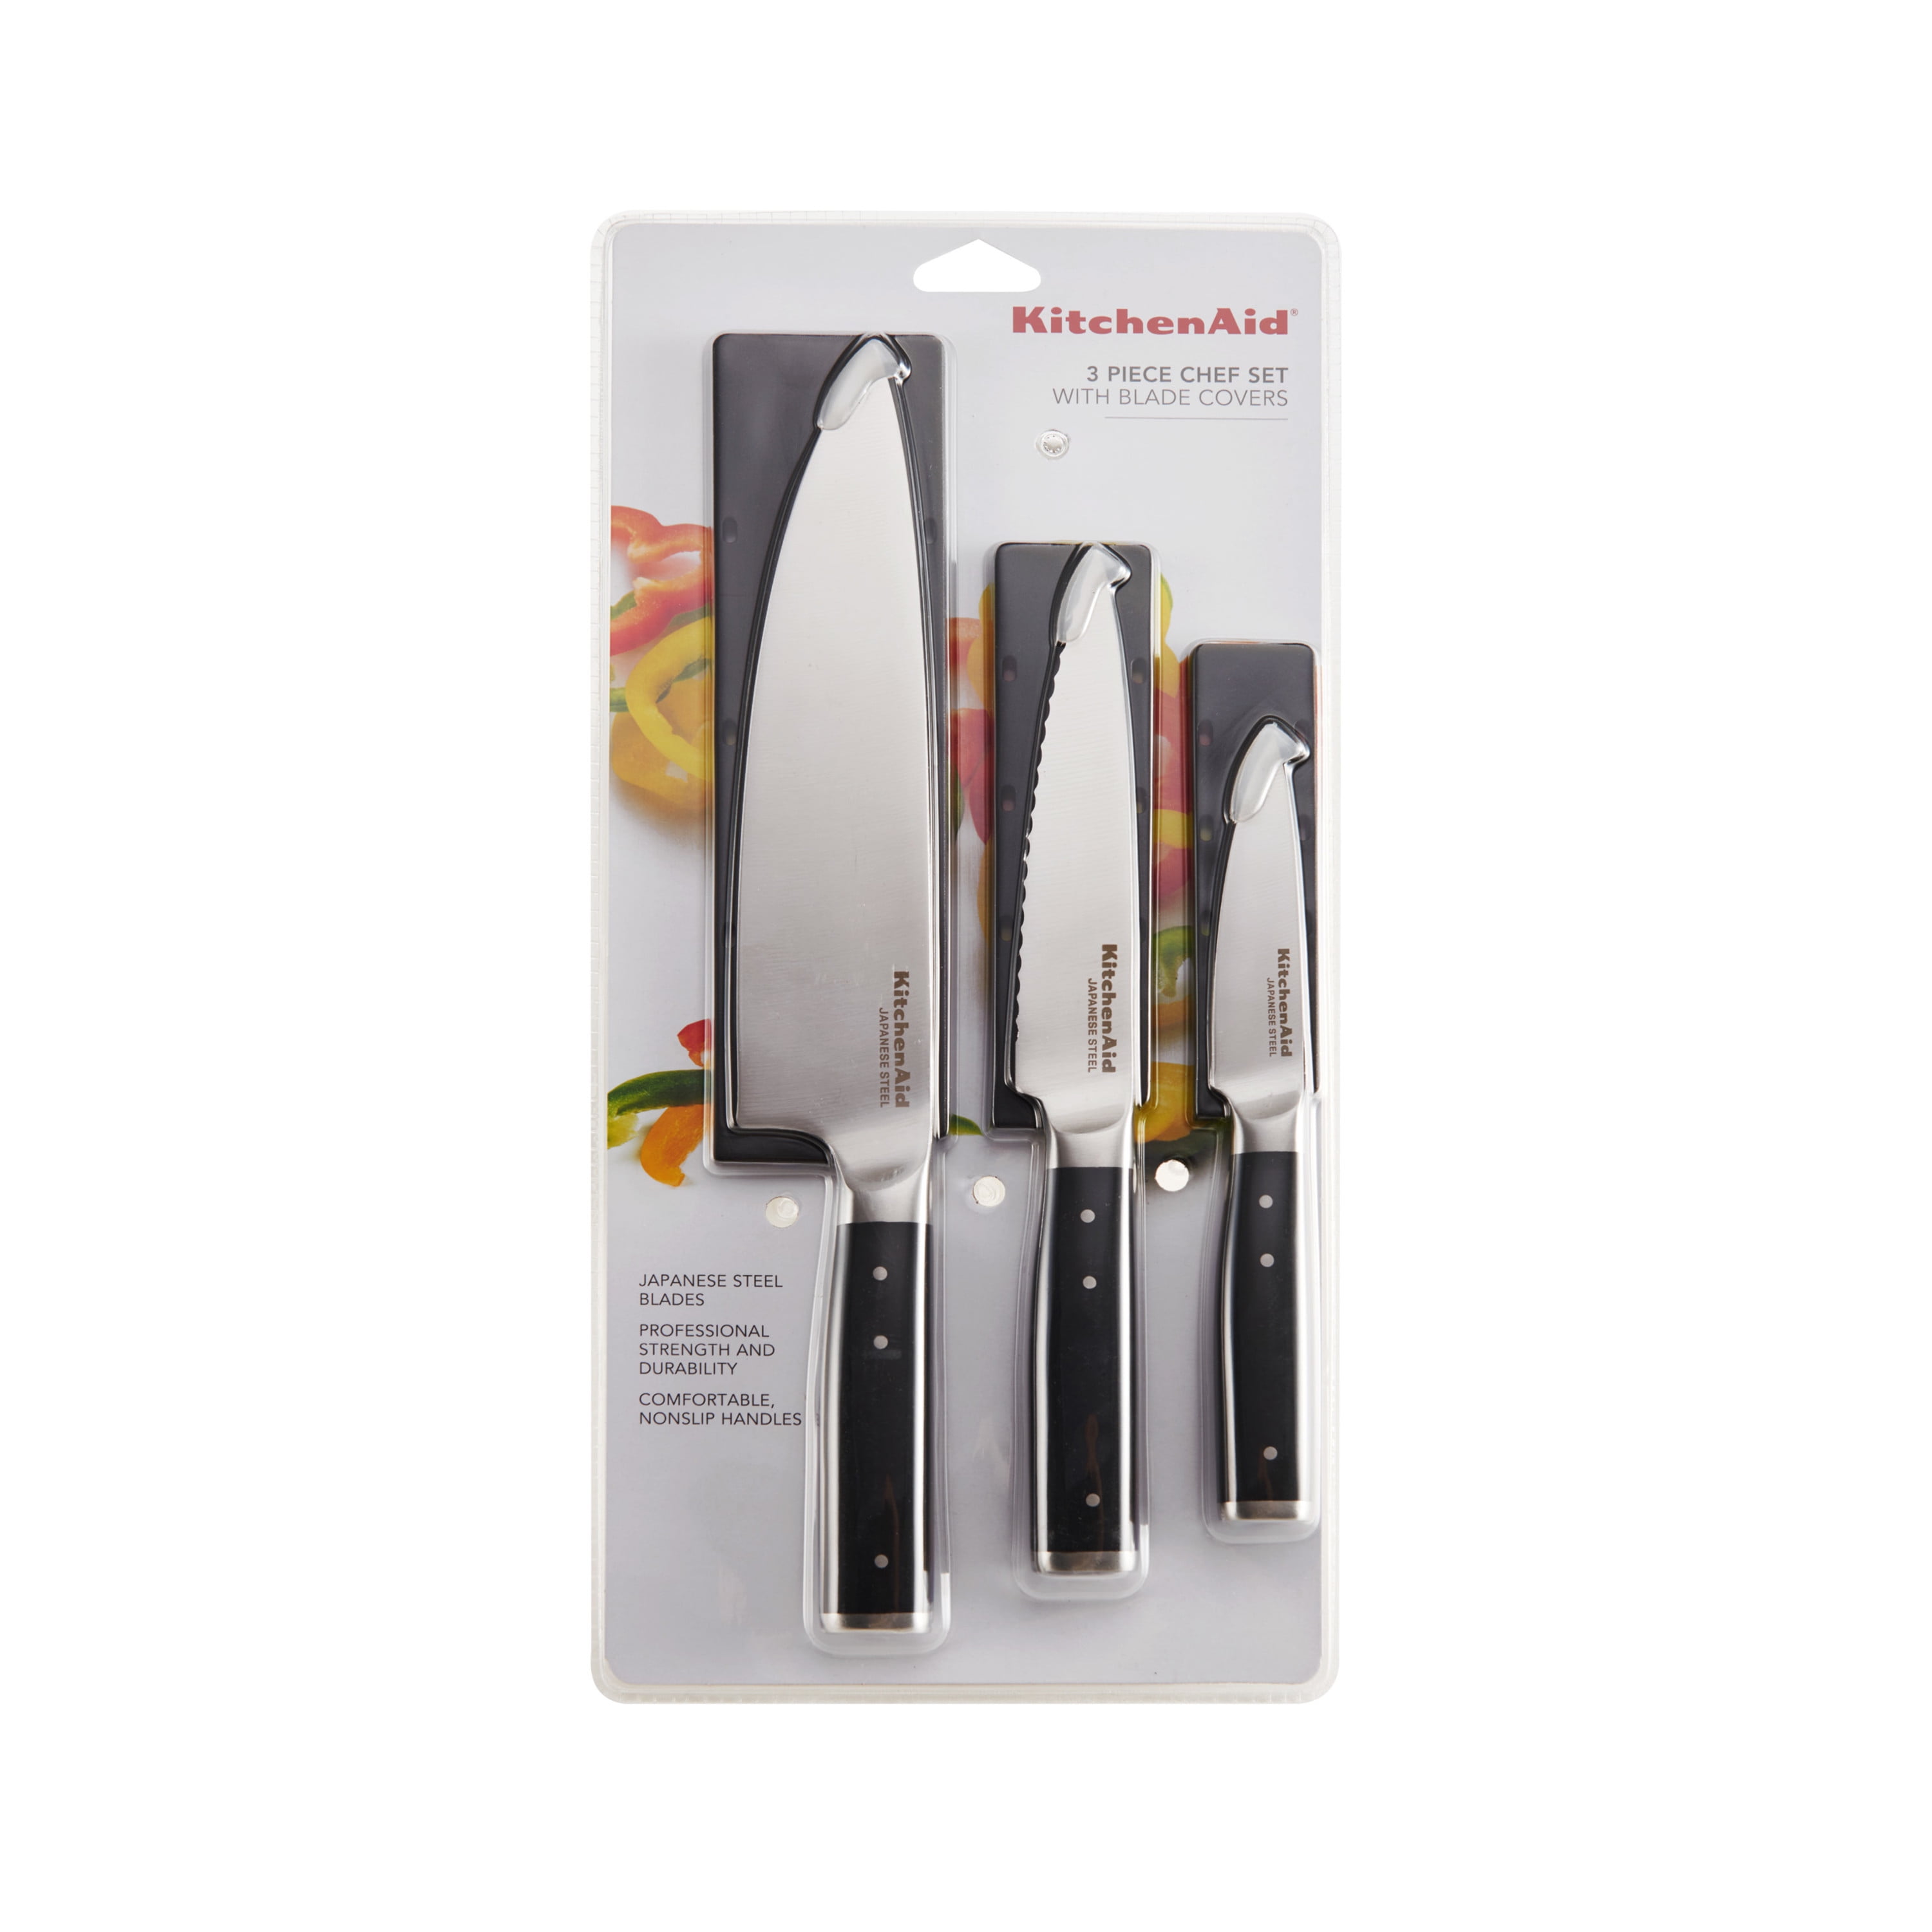 Mind Blowing Review of the KitchenAid Gourmet Knife Set: You Won't